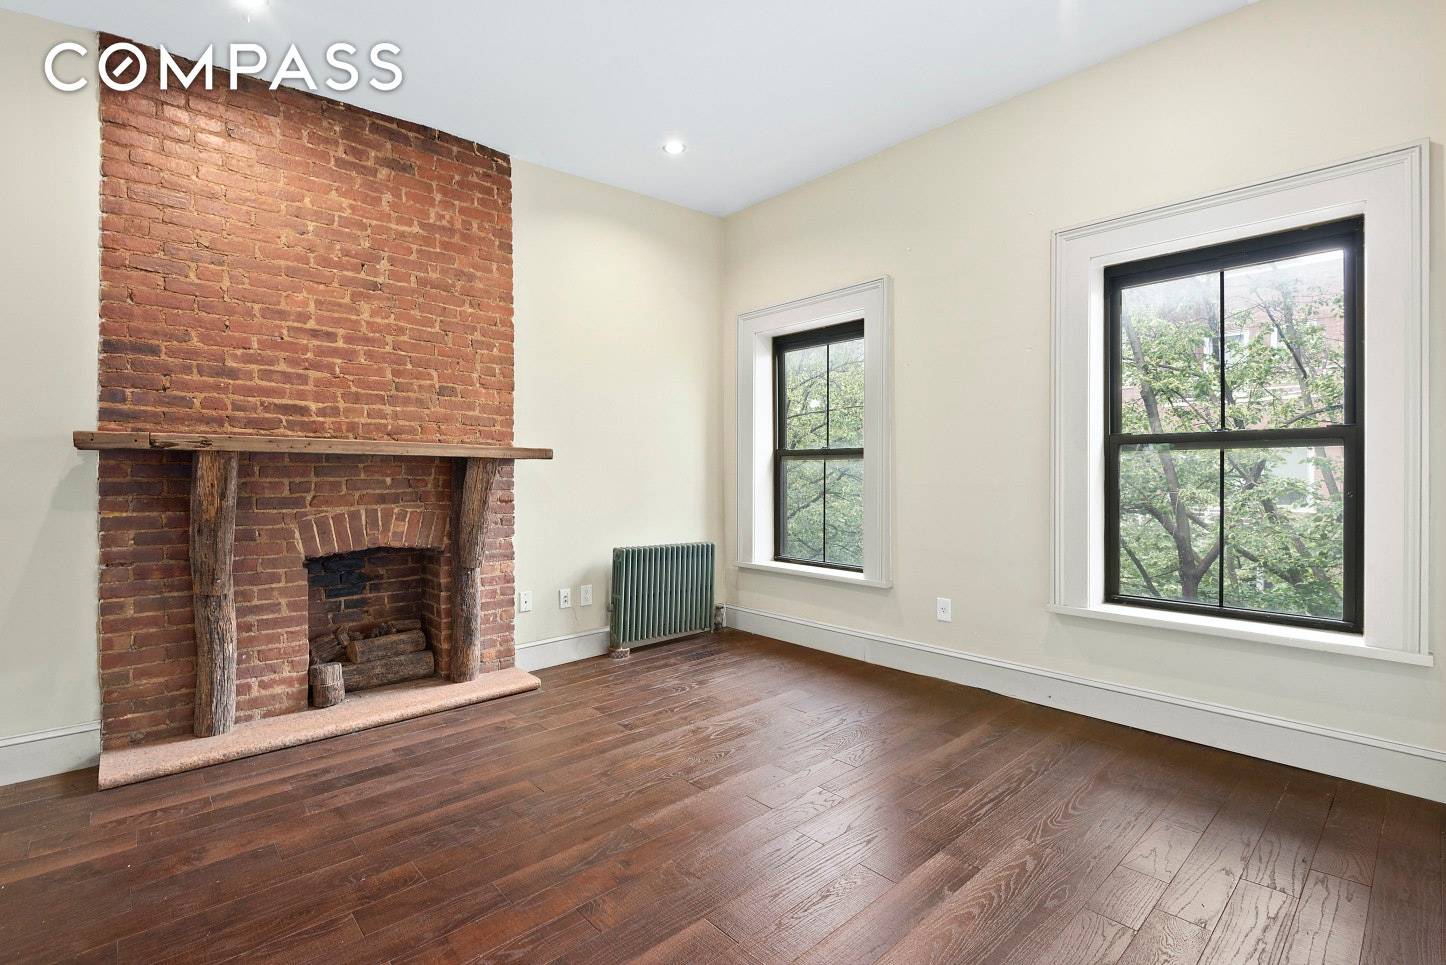 Occupy the entire 3rd floor of this beautiful, 20 foot wide, brick townhouse on a charming block in Bridge Plaza, Downtown Brooklyn ; at the nexus of DUMBO, Vinegar Hill ...